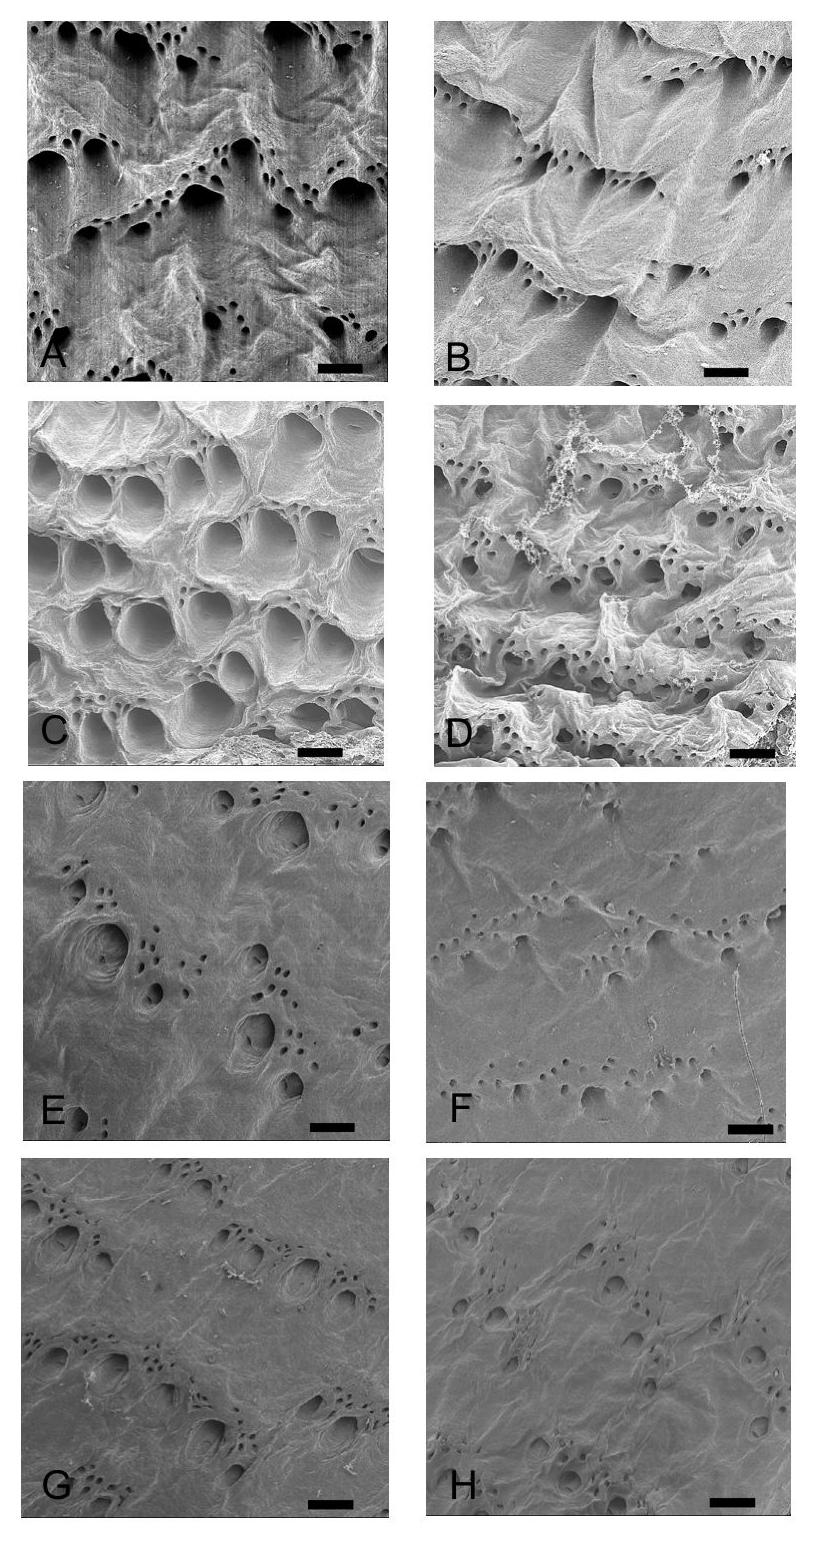 Fig. 1 SEM views of yeso sika deer skin and vegetable tanned leather grain Raw skin (A-D), vegetable tanned